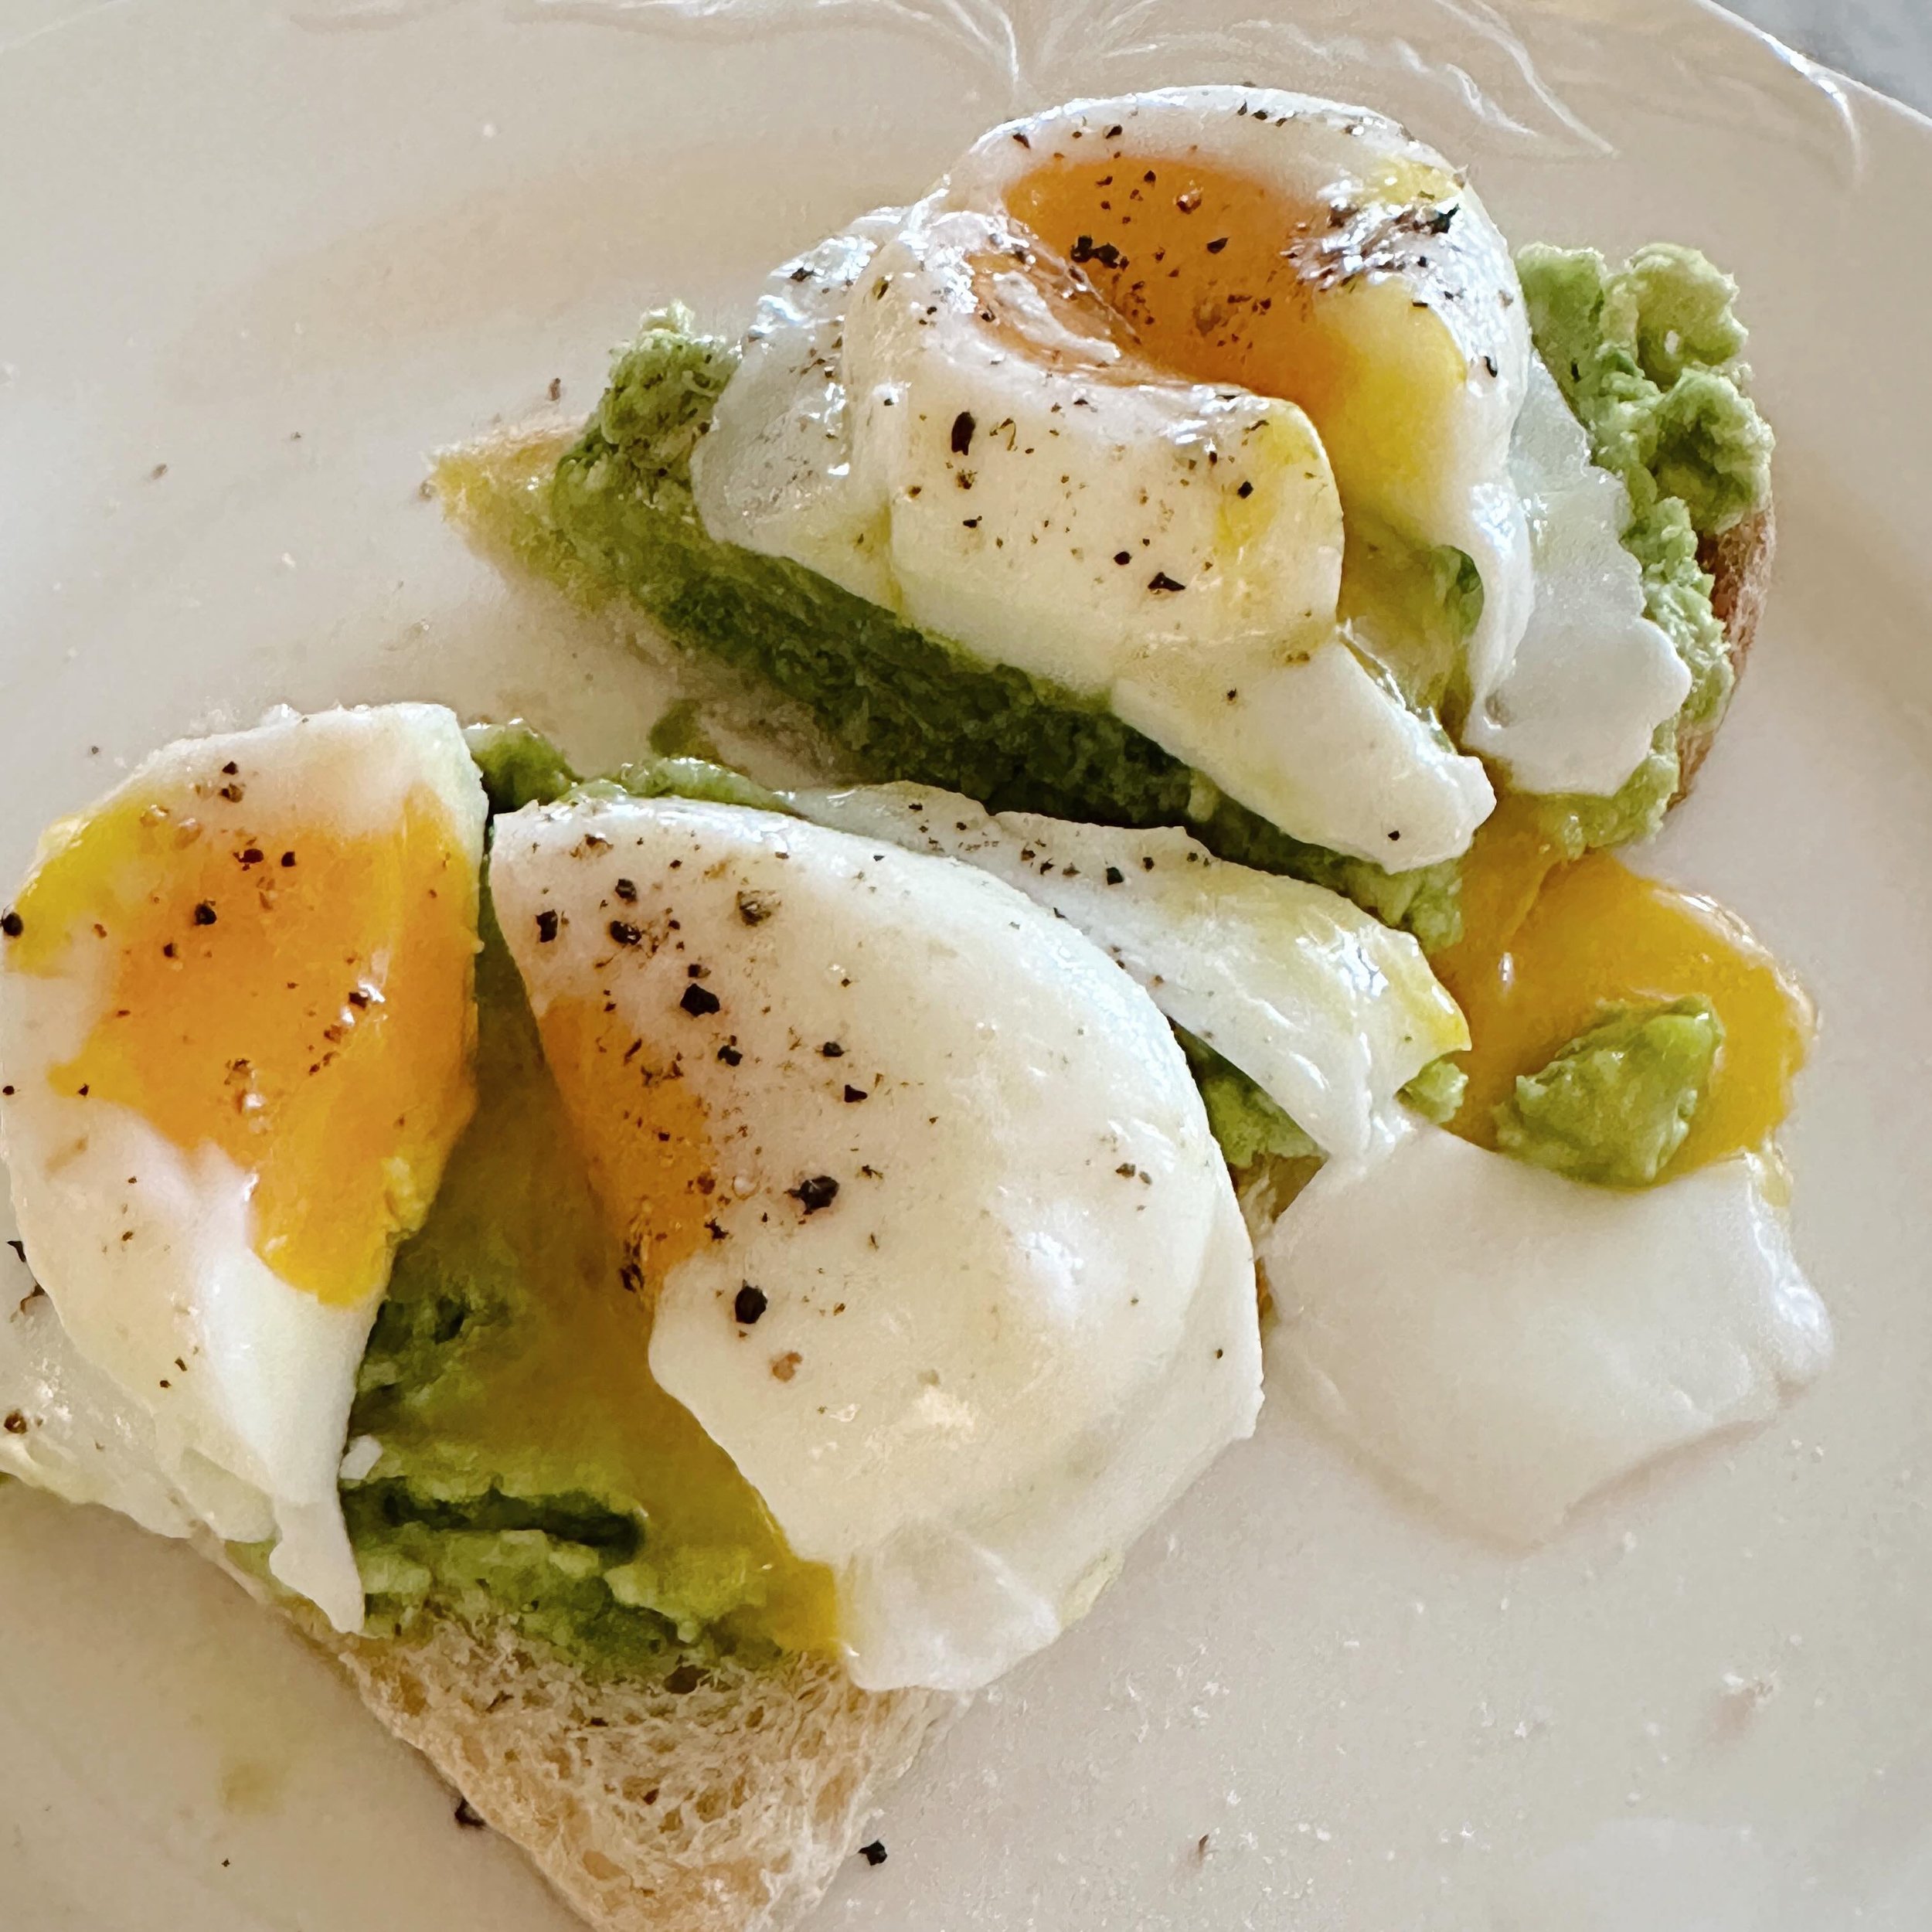 Organic avocado and eggs on homemade toast for breakfast today inspired by @nutritionschool. ✨ This blood sugar balancing brekkie is setting this body up for day long success. Now I&rsquo;ve eaten something my body will be able to cope with its coffe